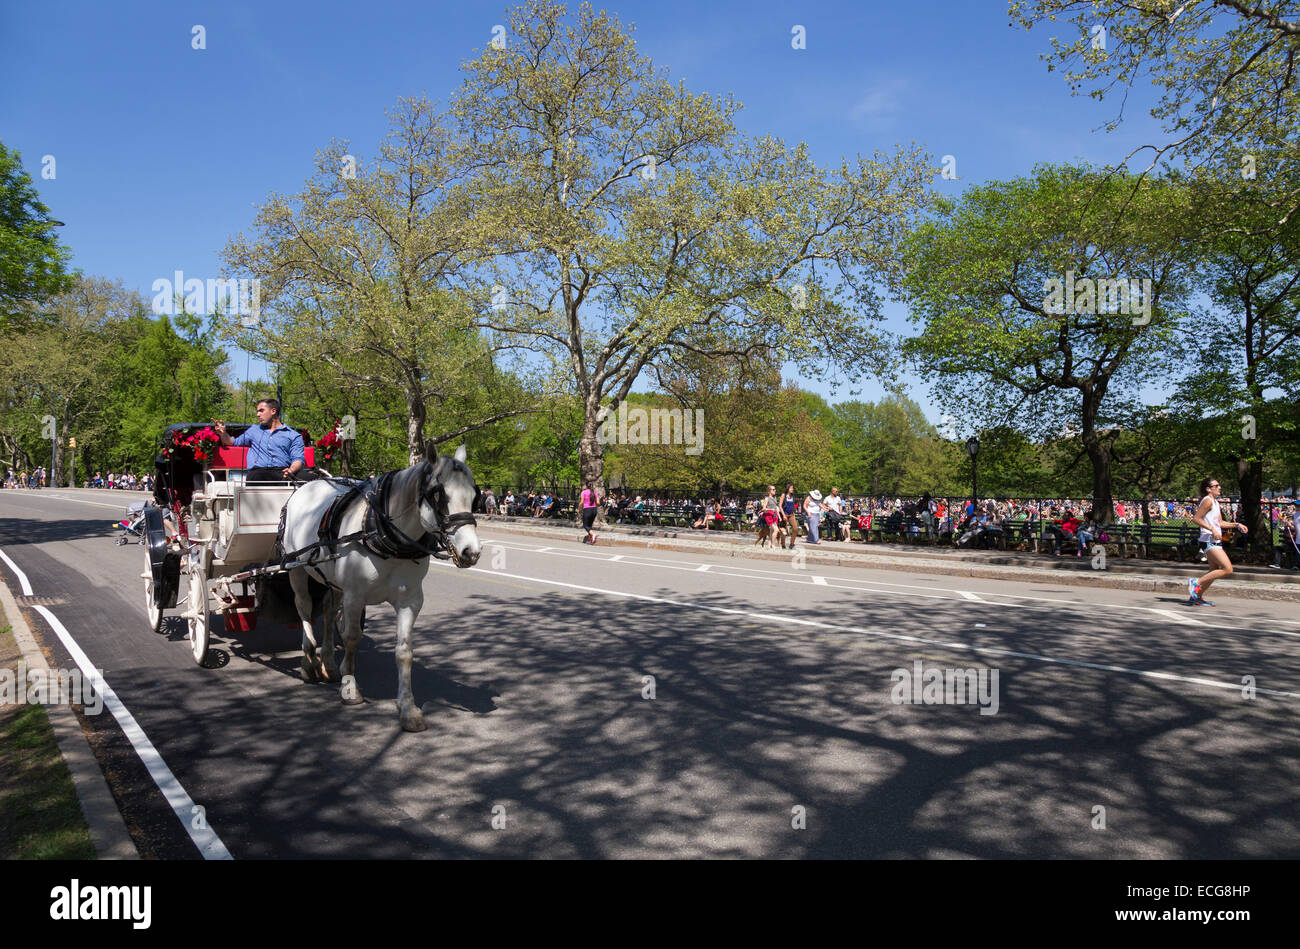 Horse-drawn carriage taking visitors through Central Park, New York Stock Photo